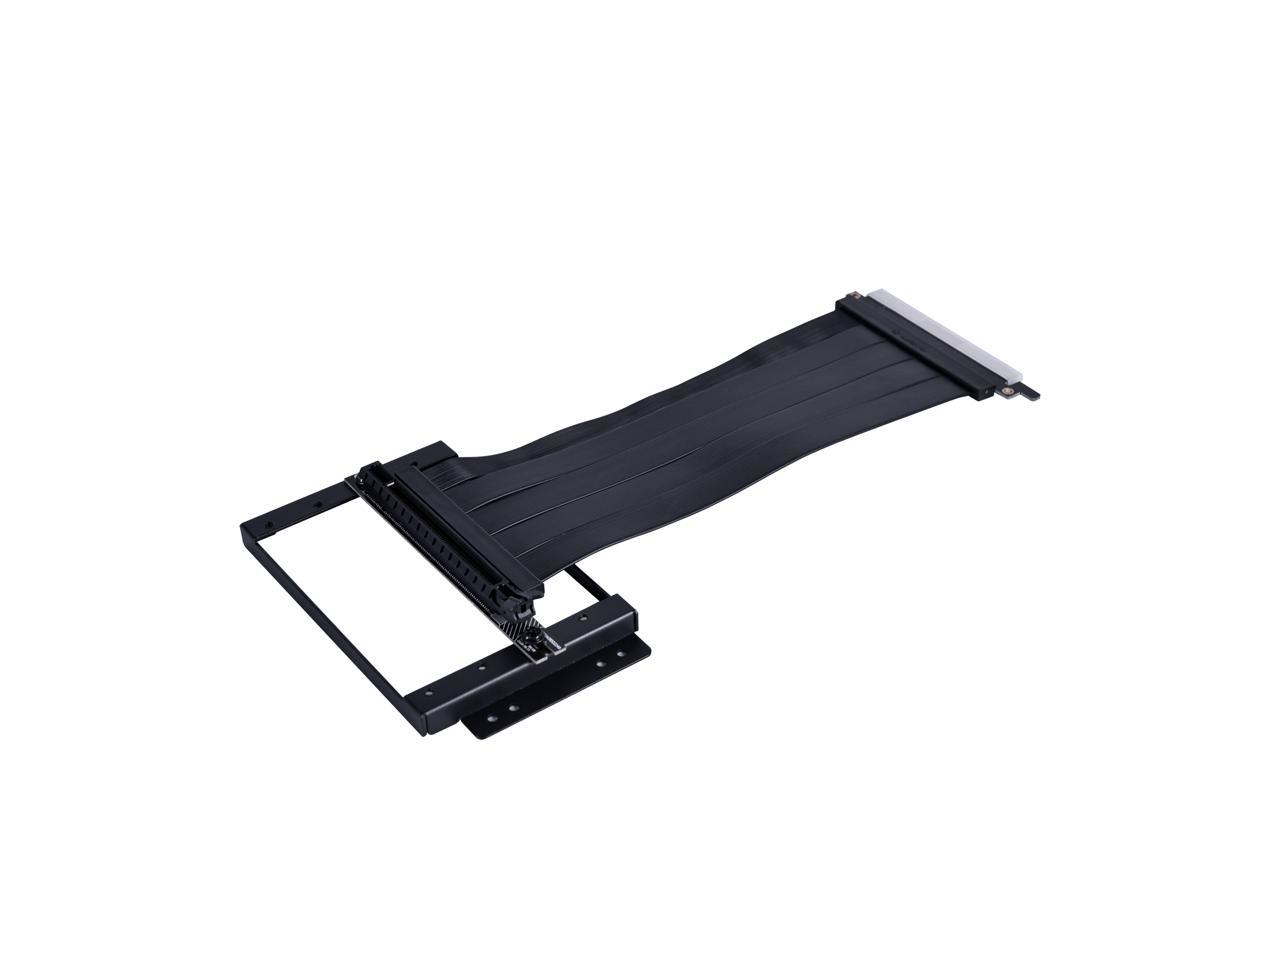 LIAN LI O11D-1X-4 Premium PCI-E 4.0 Black Extender Riser Cable 200mm and Cover Bracket for PC-O11D and PC-O11AIR